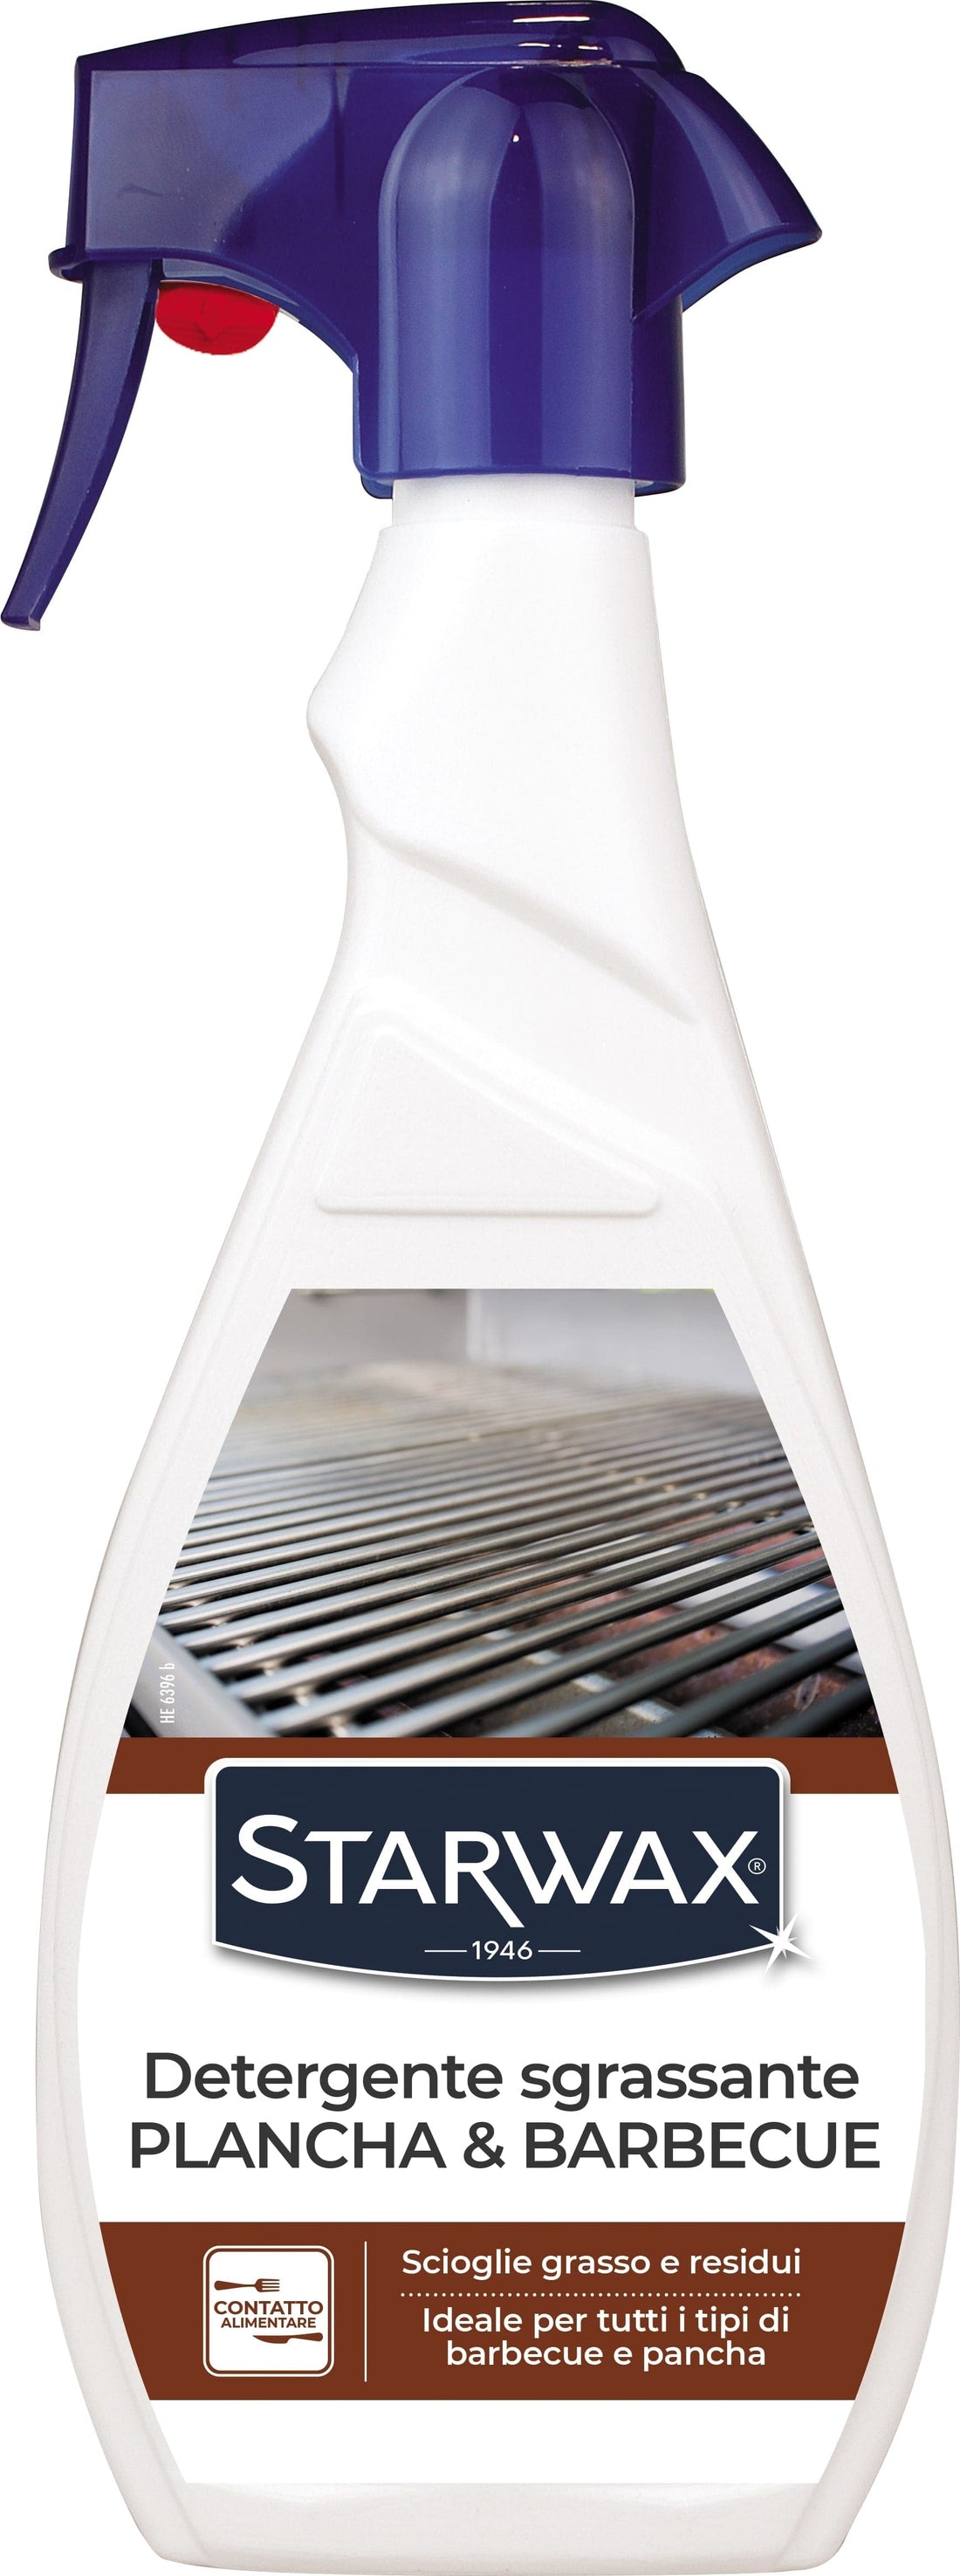 BBQ GRILL CLEANER AND ACCESSORIES - best price from Maltashopper.com BR470510154